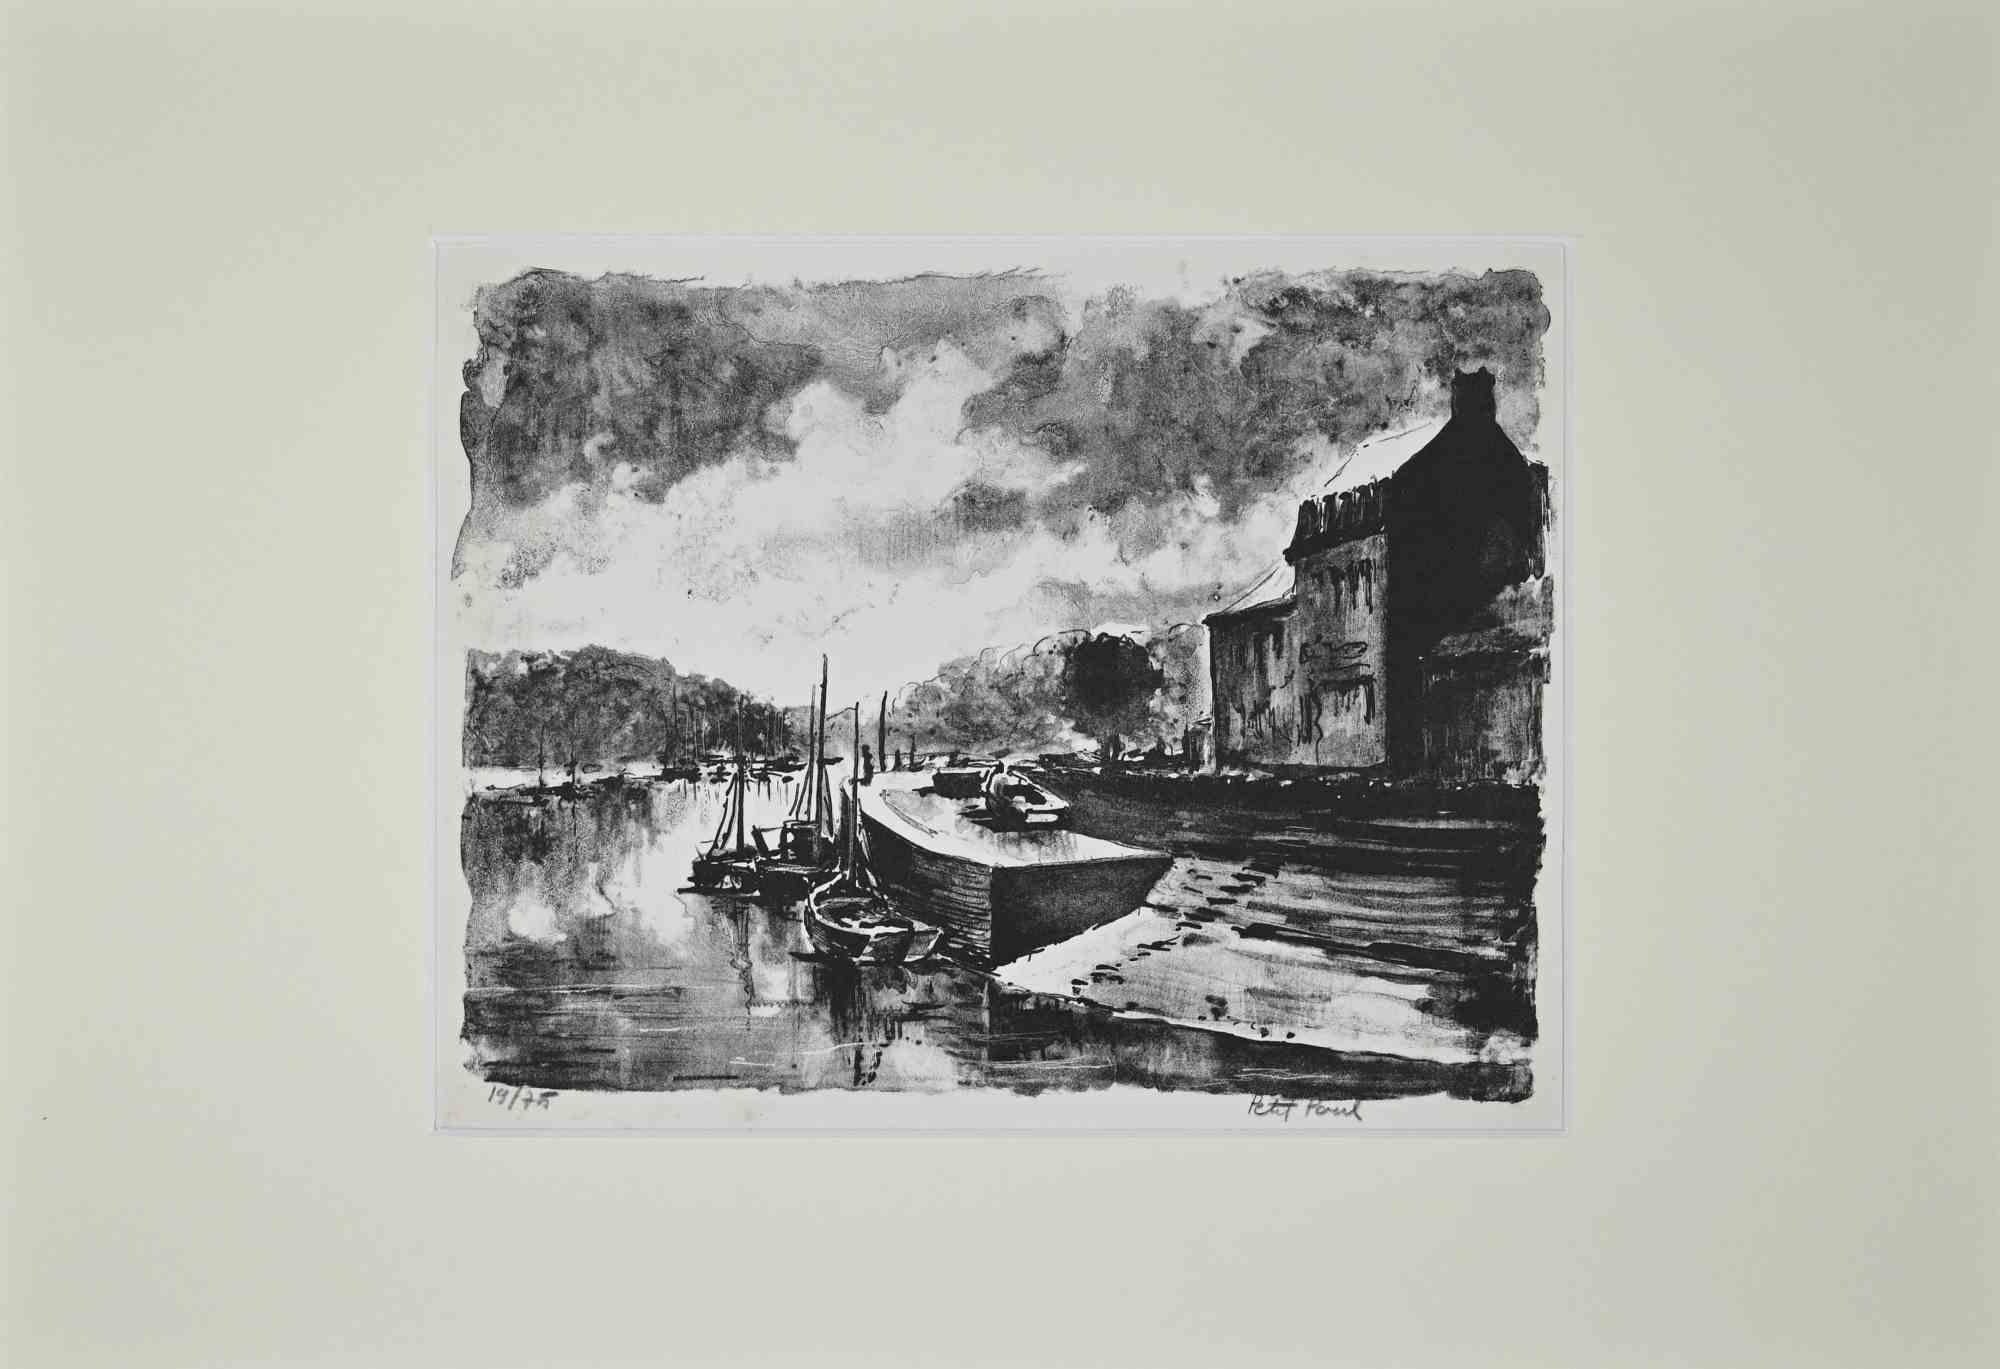 Harbor View is an original lithograph realized by Paul Petit in the Mid-20th Century

Hand-signed.

Numbered, 14/75

The artwork is depicted through confident strokes in a well-balanced composition.